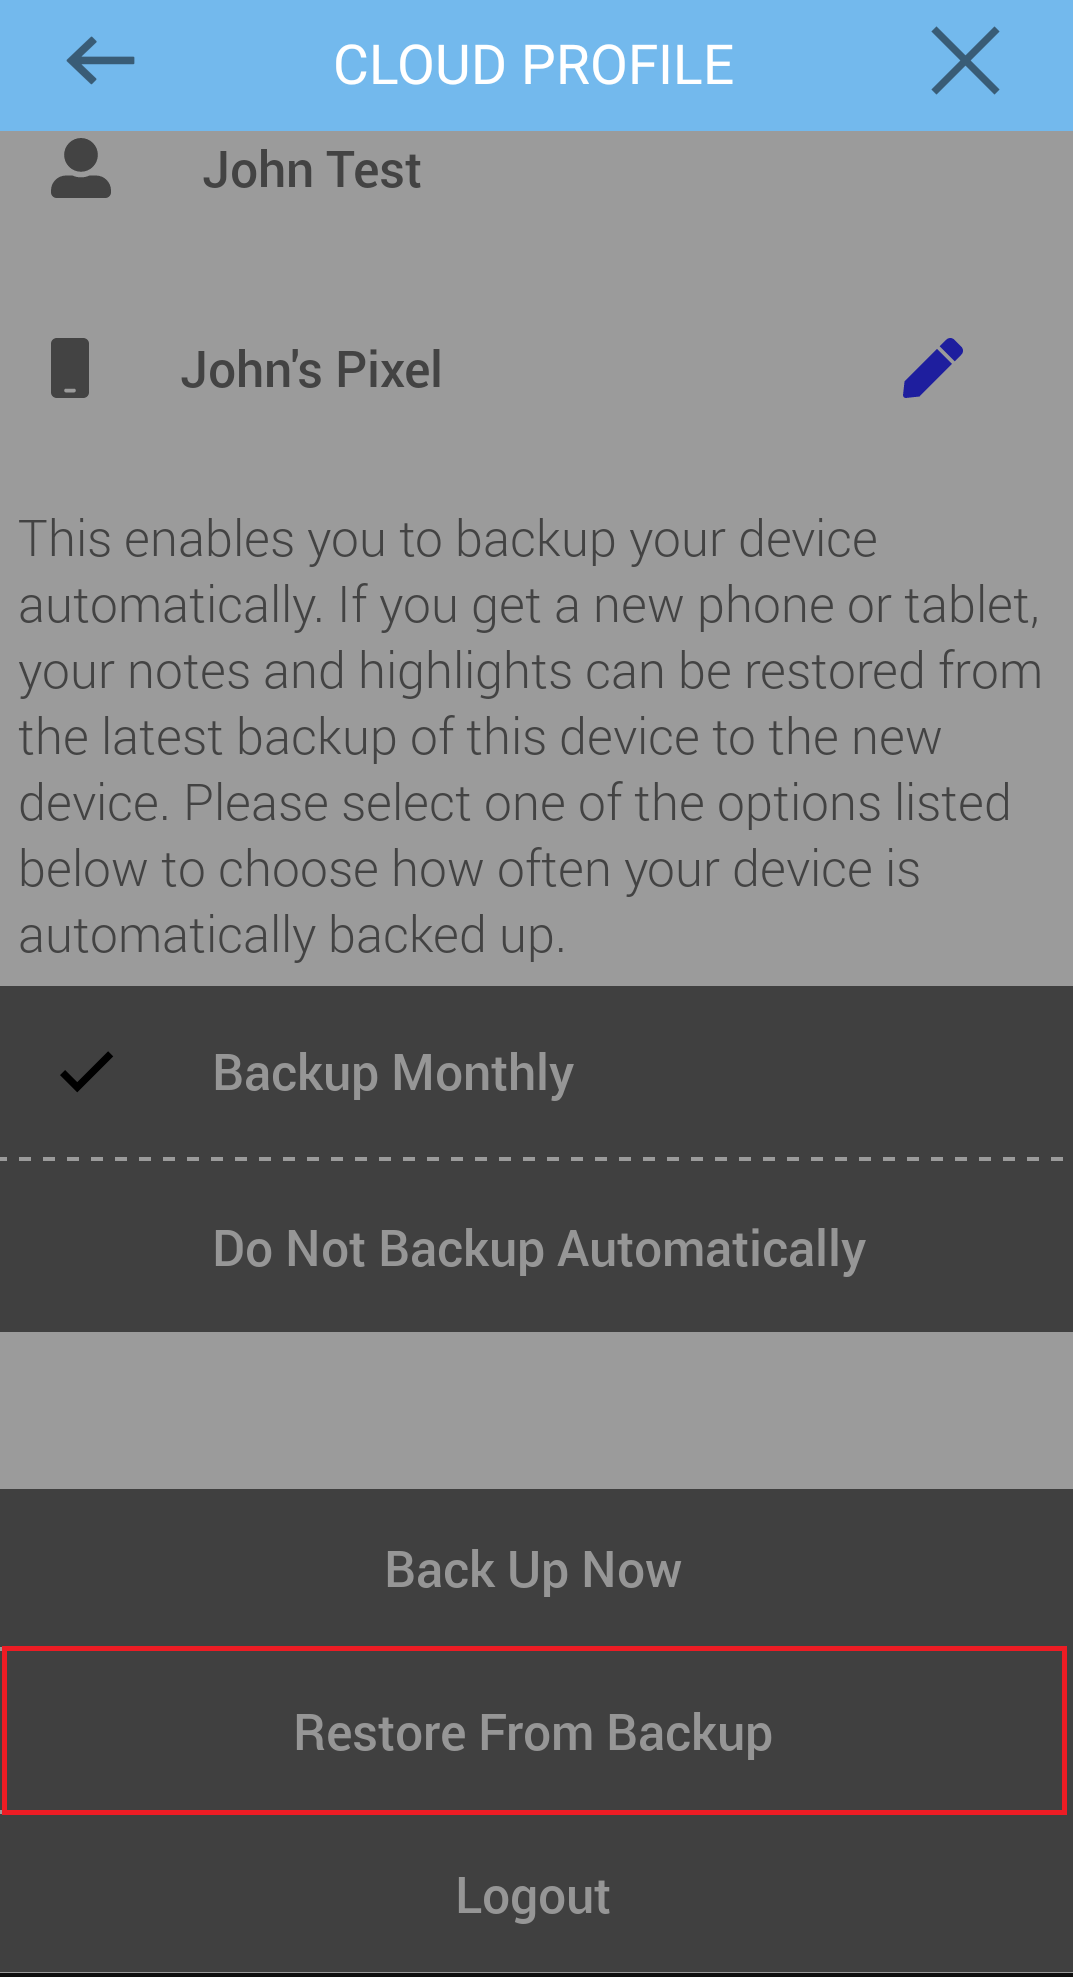 Restore From Backup Button